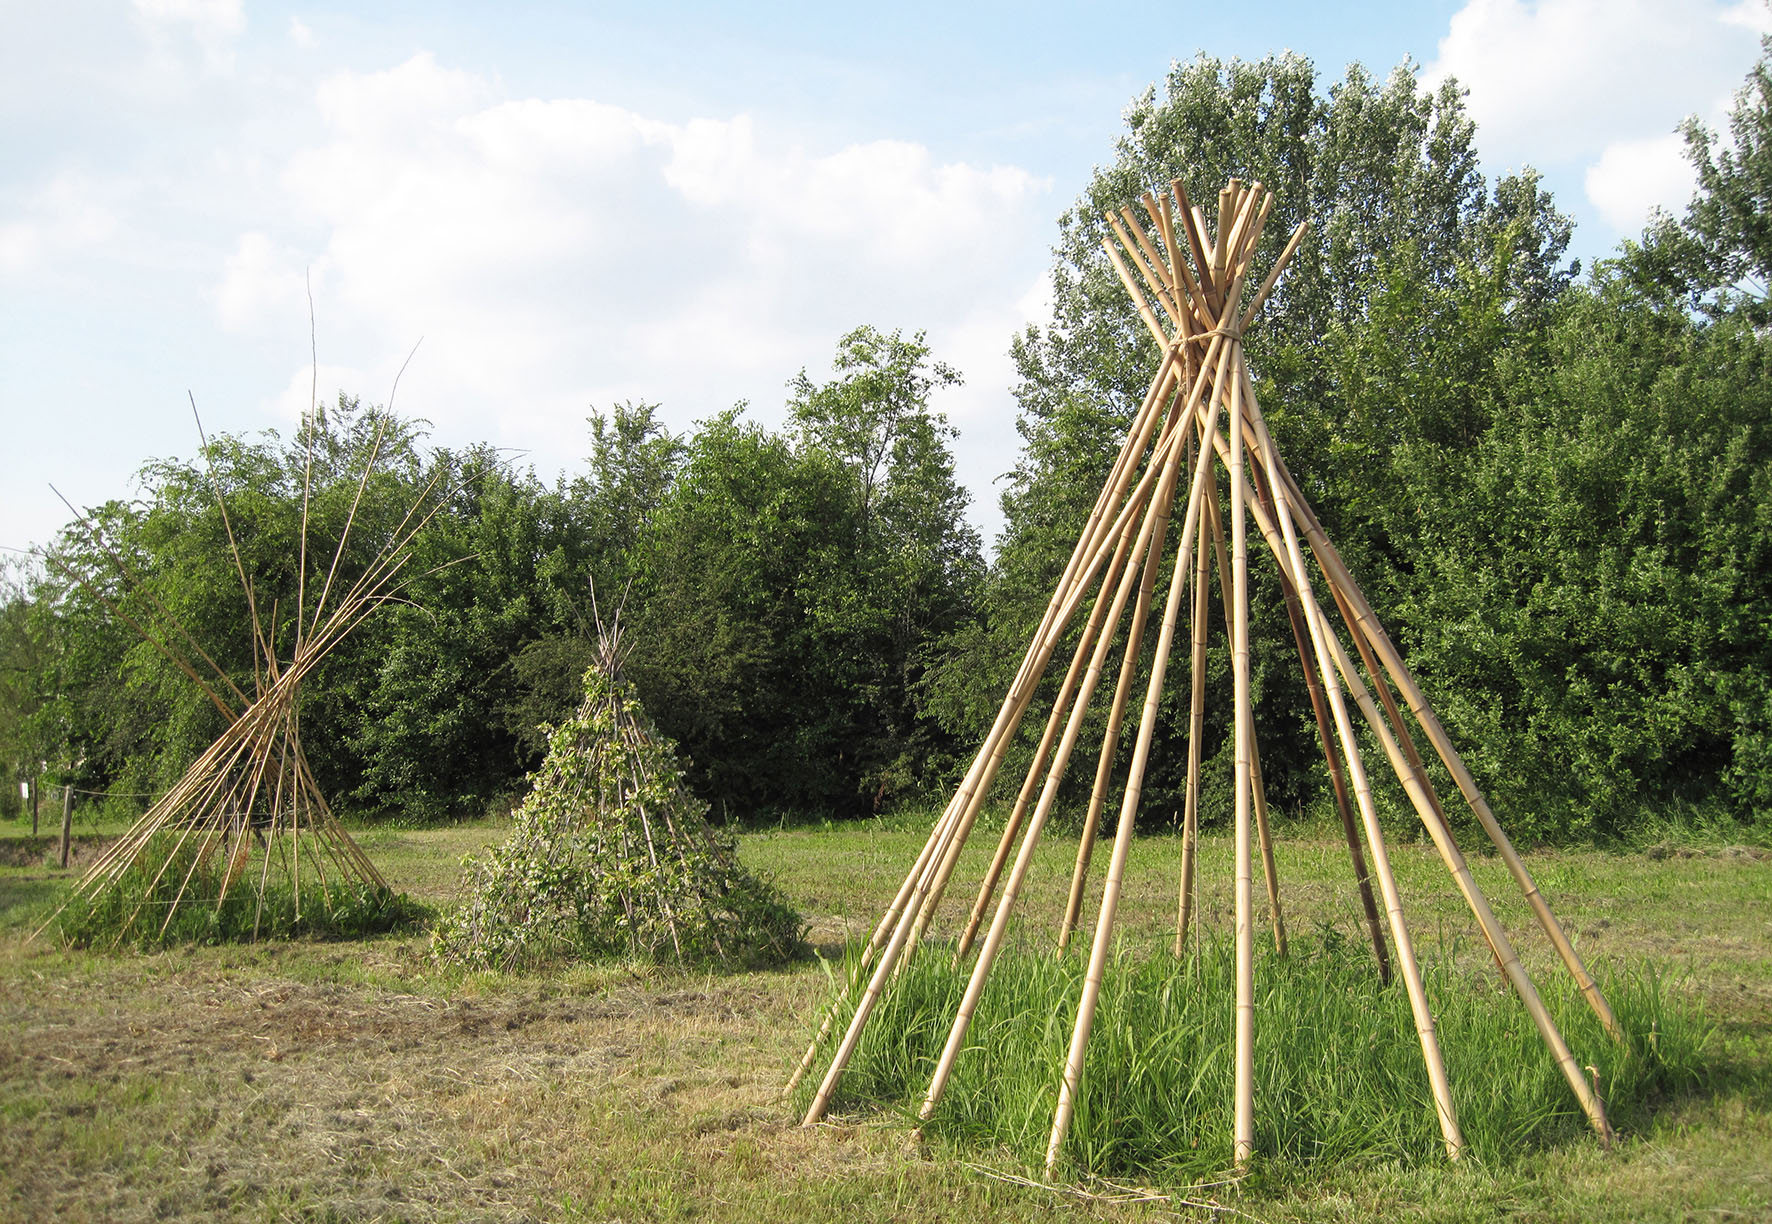 The Sacred Plants of the American Indians: Tepee of the Wind, Tepee Garden, The Big Tepee, 2016. DepurArt Lab Gallery, Nosedo Treatment Plant, Milan